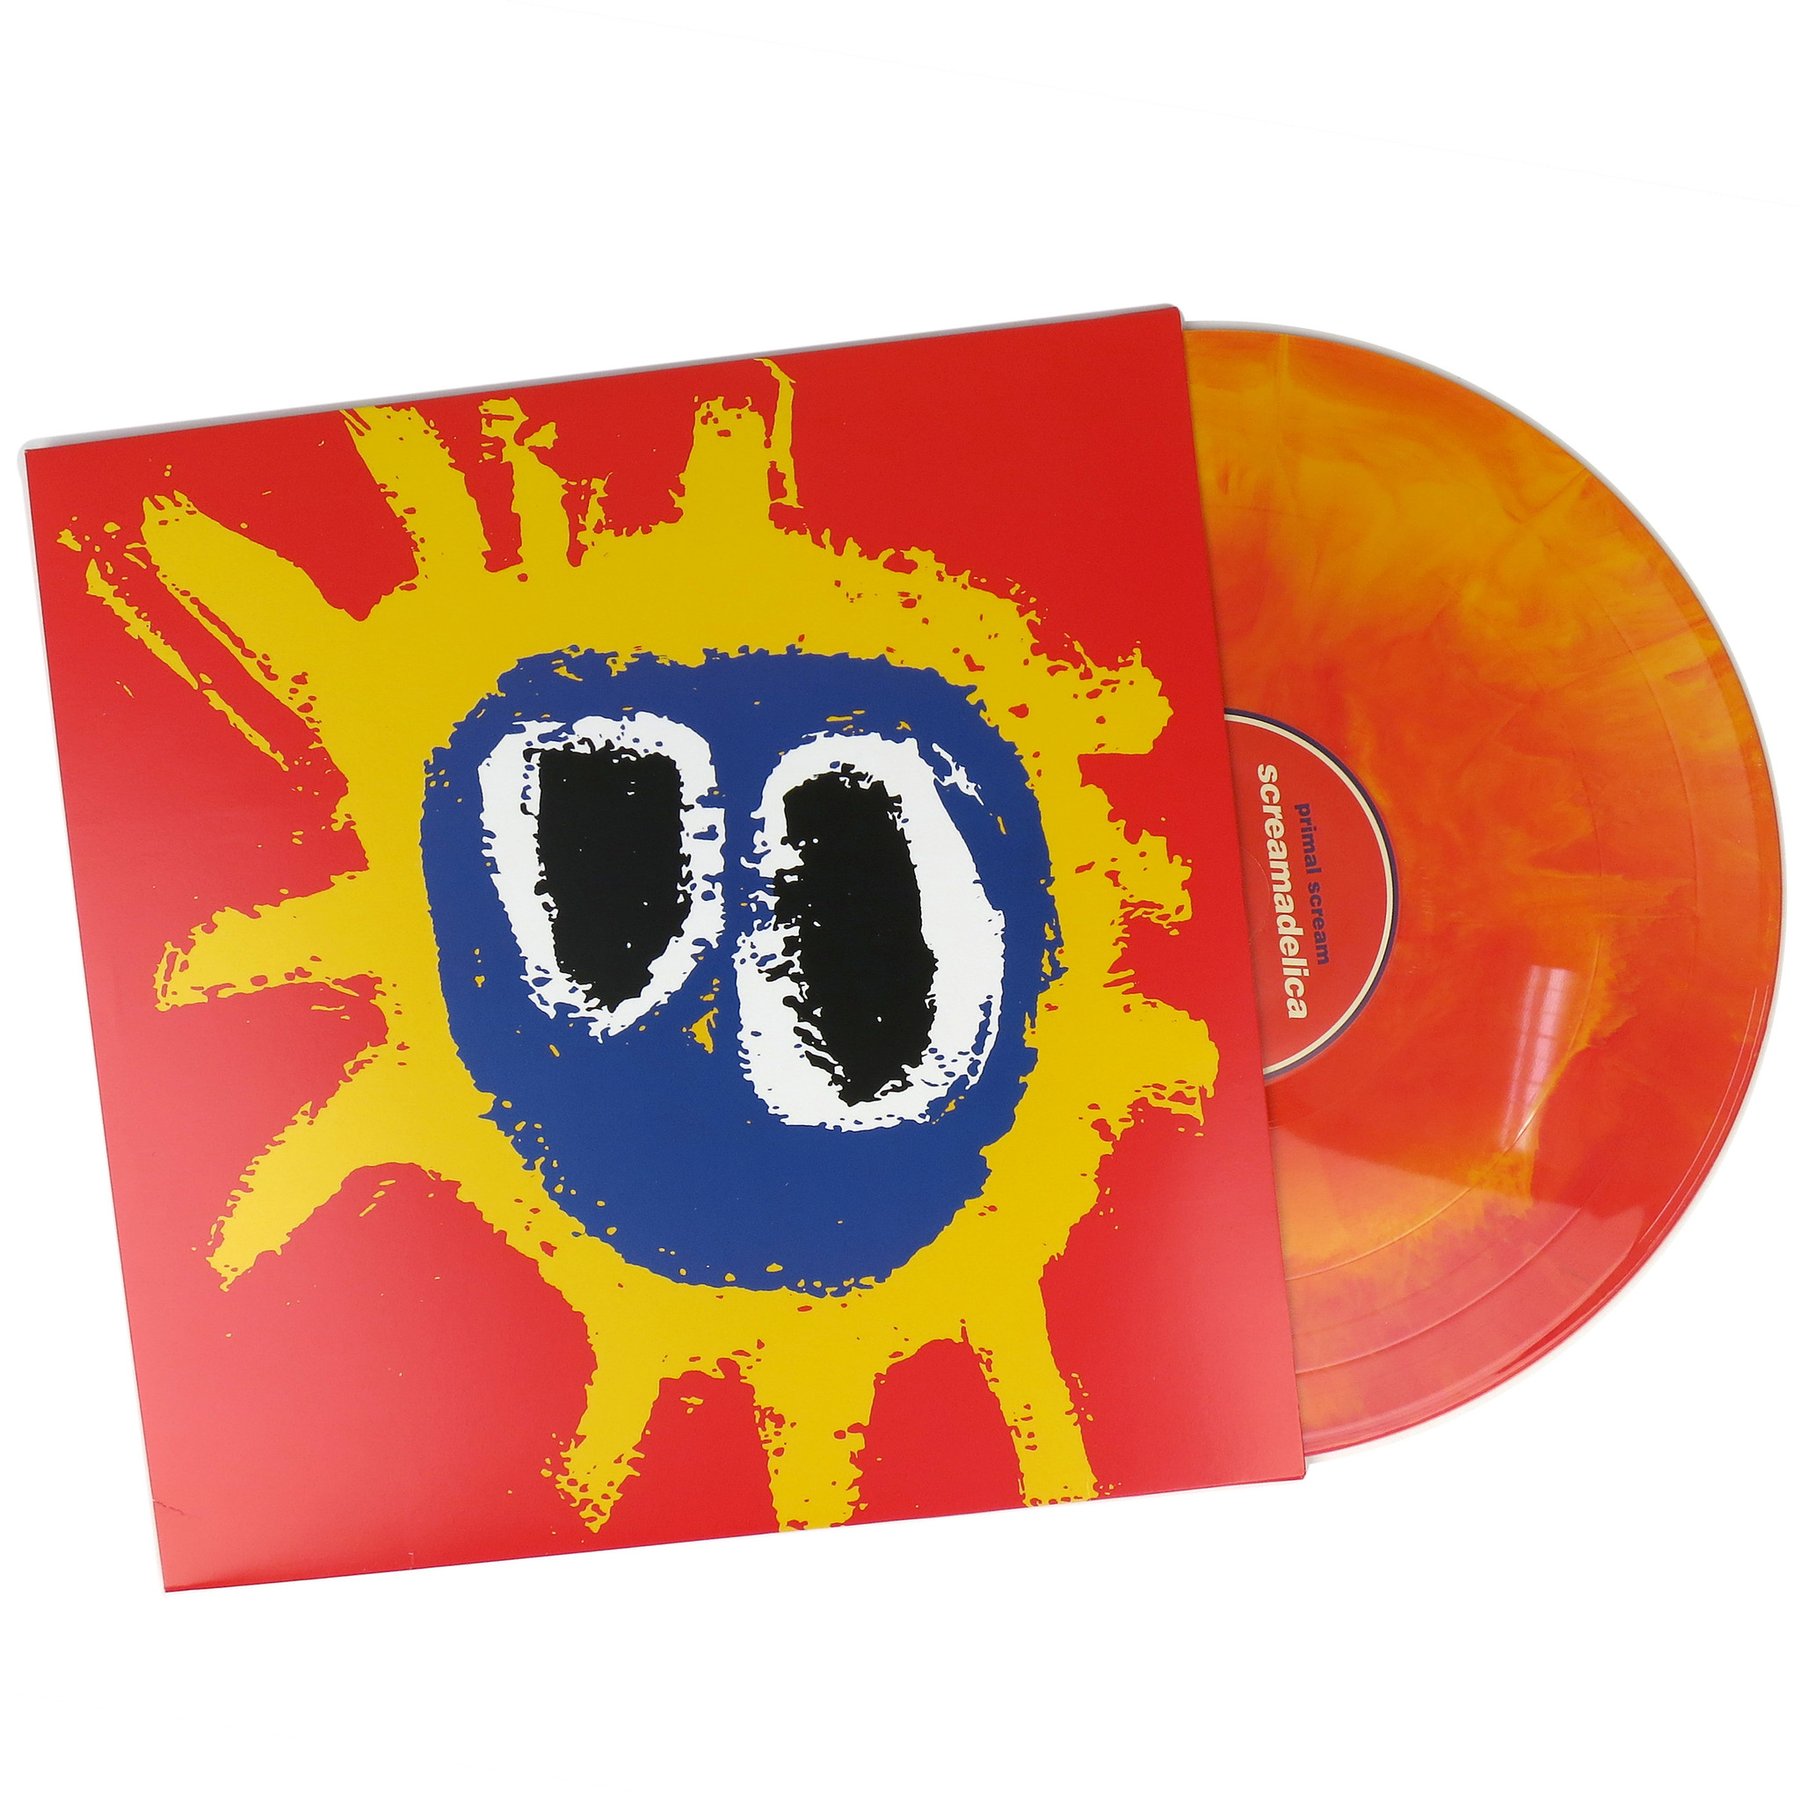 Screamadelica (limited red and yellow vinyl)